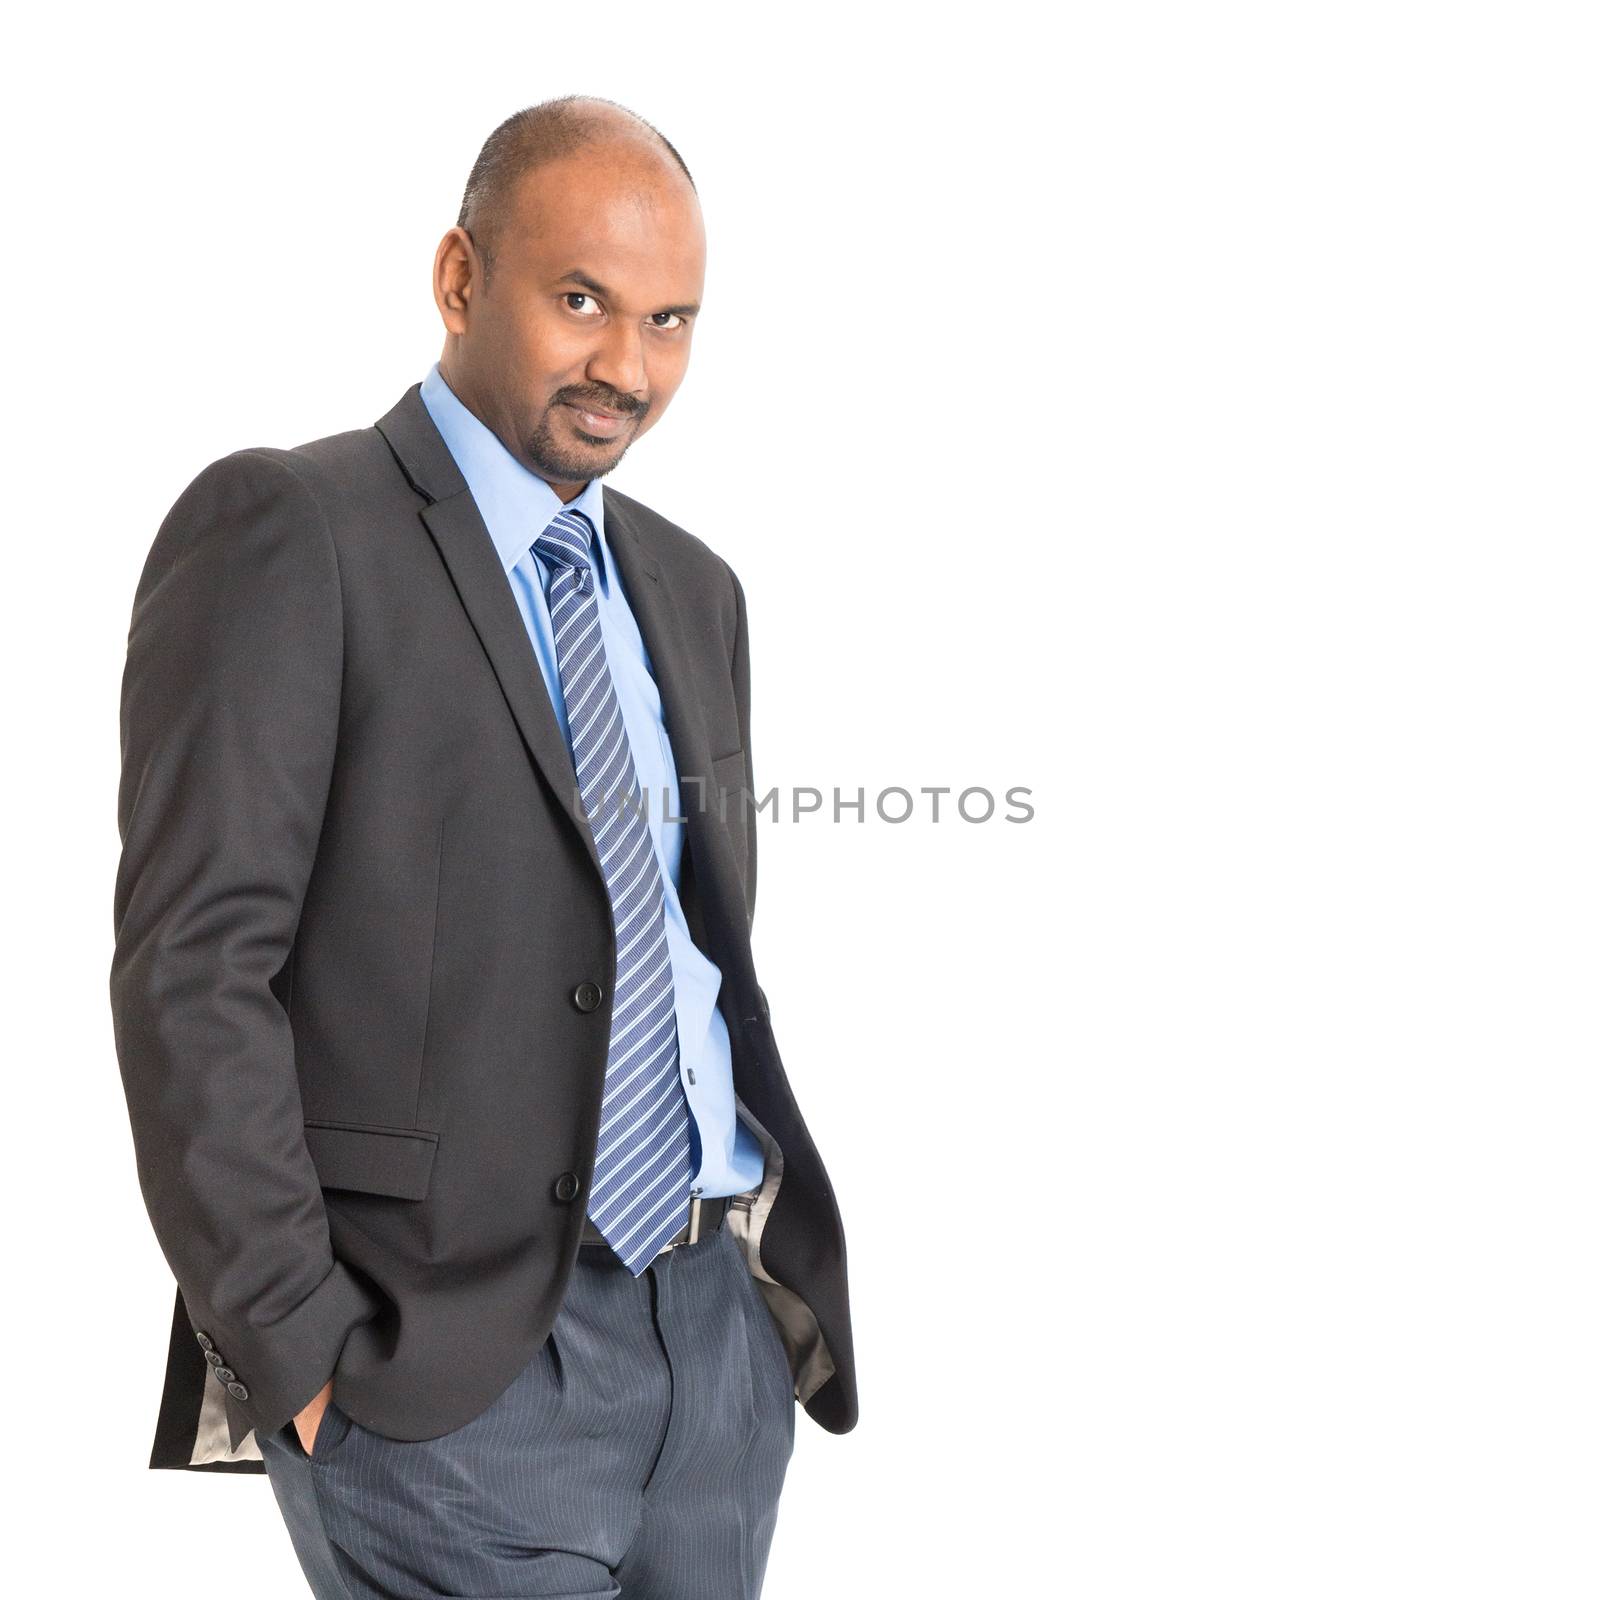 Indian businessman in formal suit looking at camera, isolated on white background.